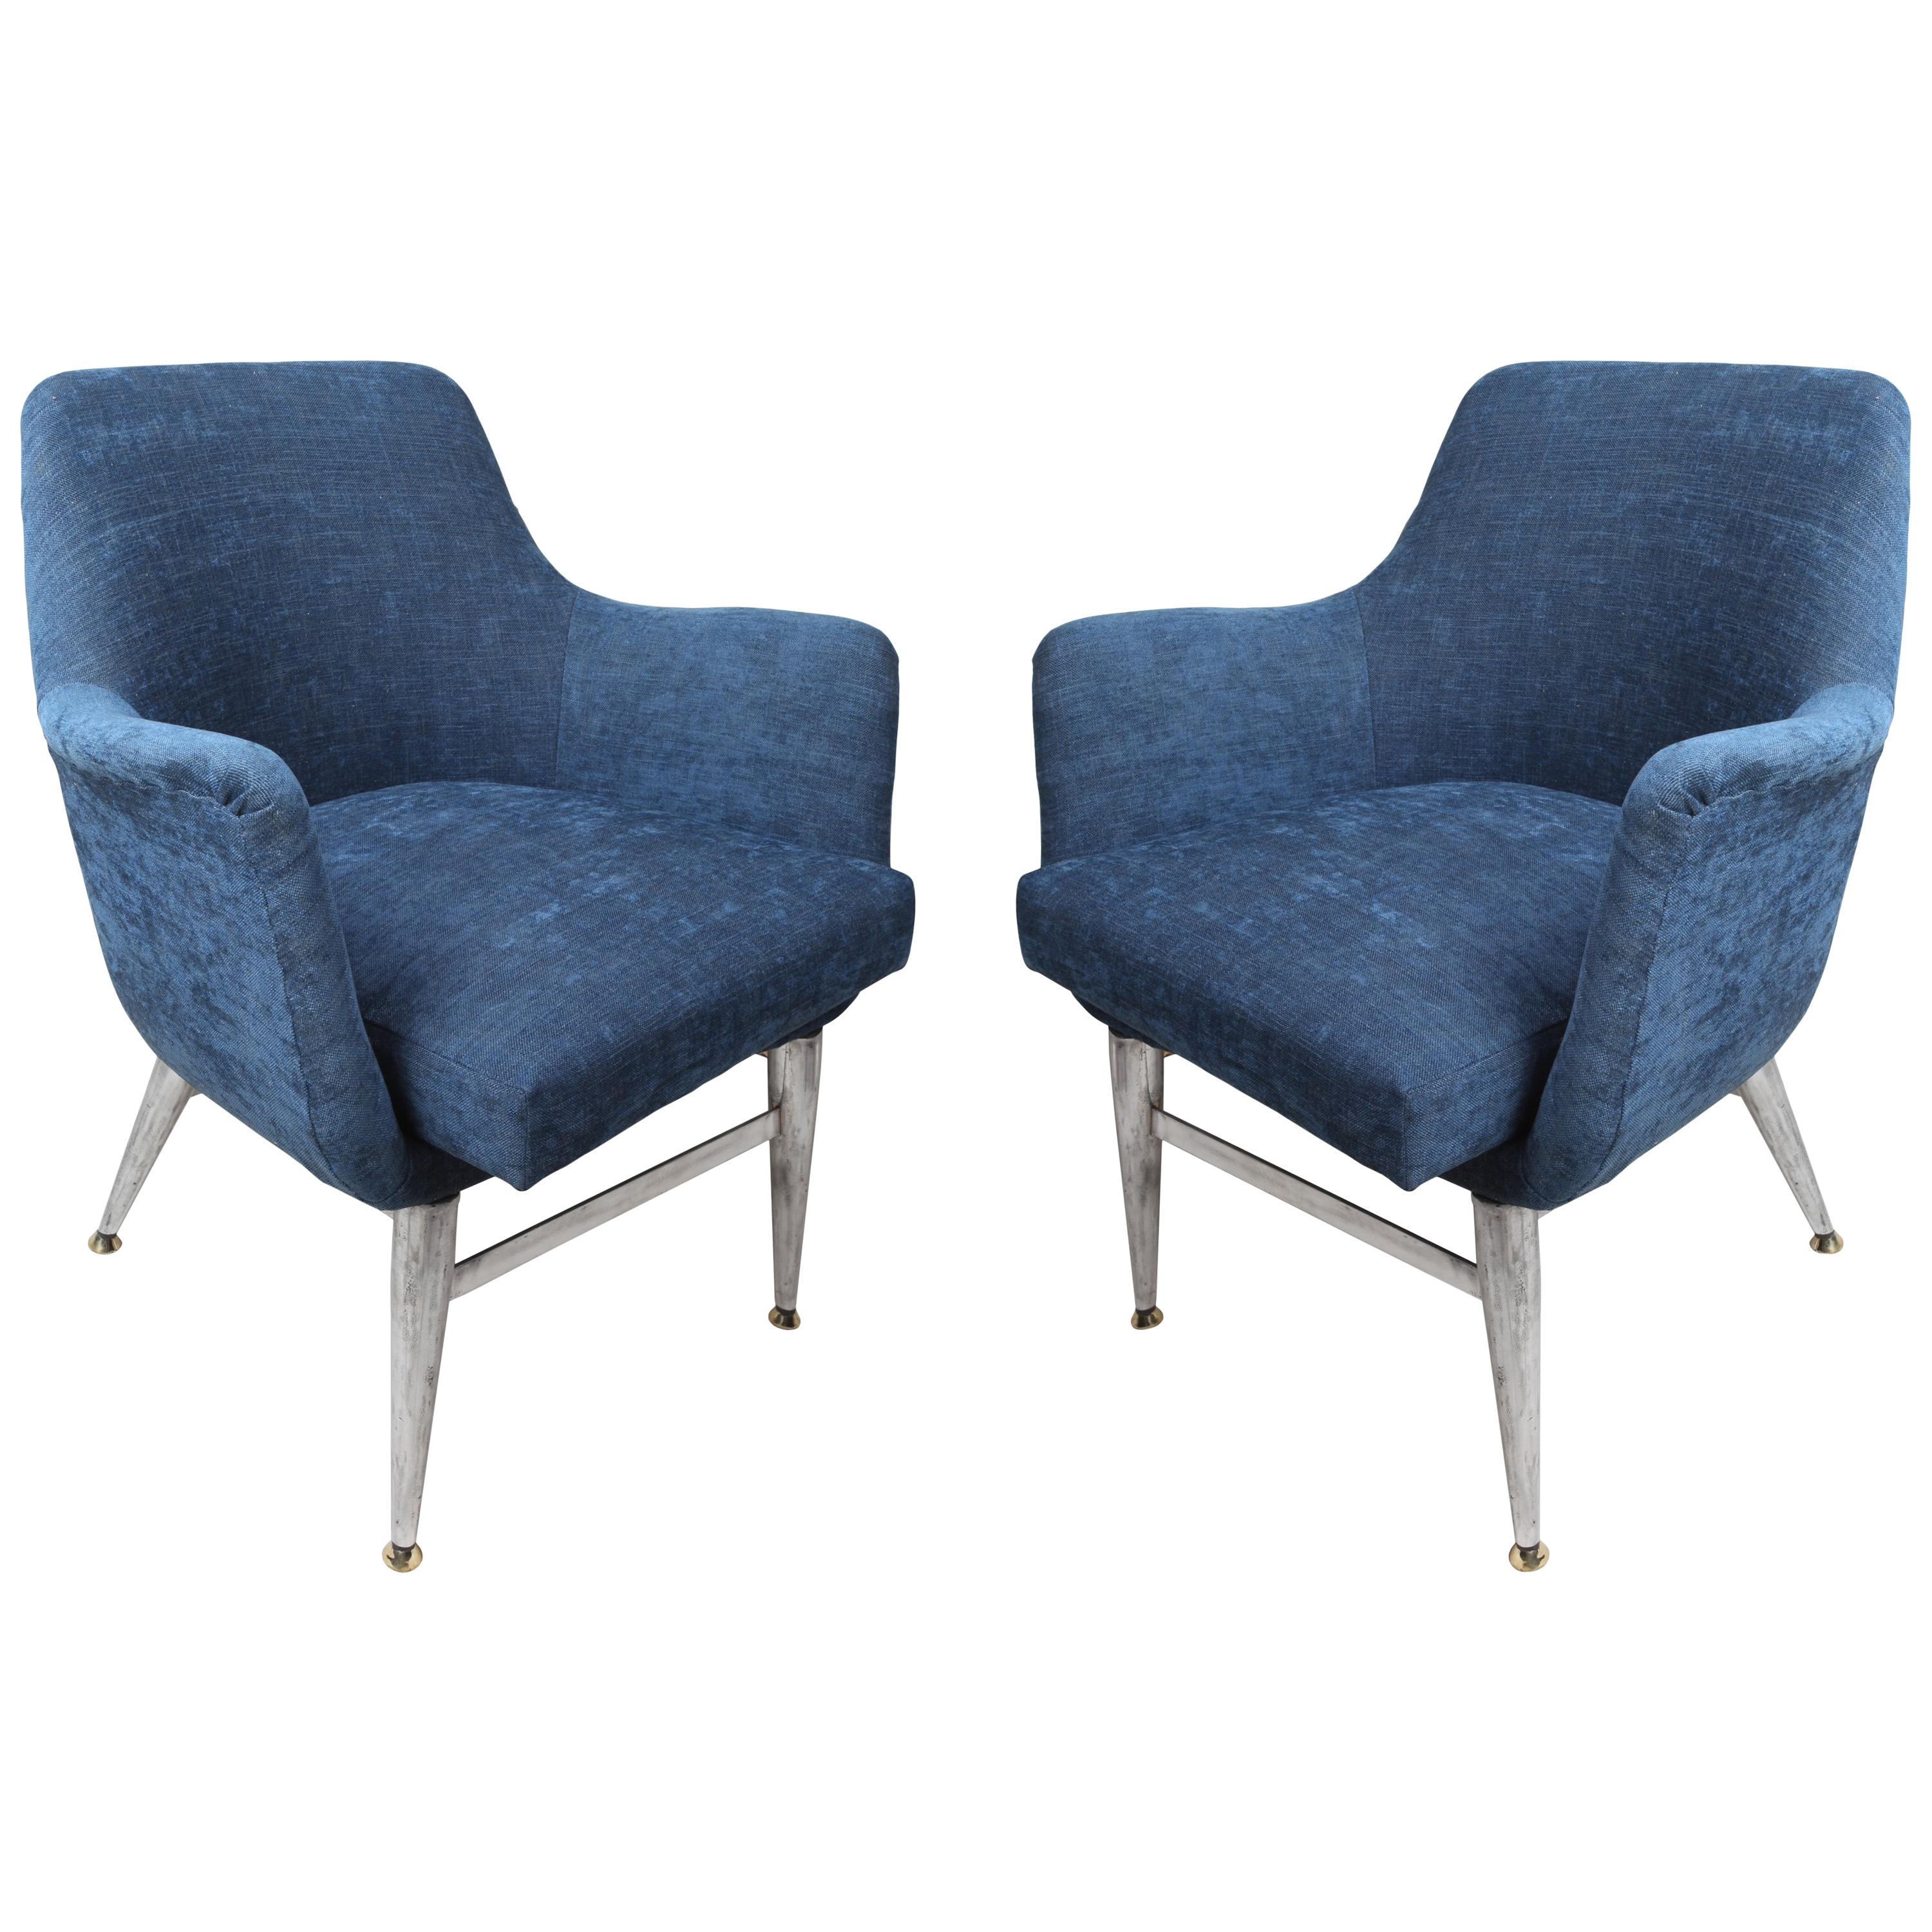 Mid-Century Modern Pair of Blue Chairs with Chrome Base and Legs